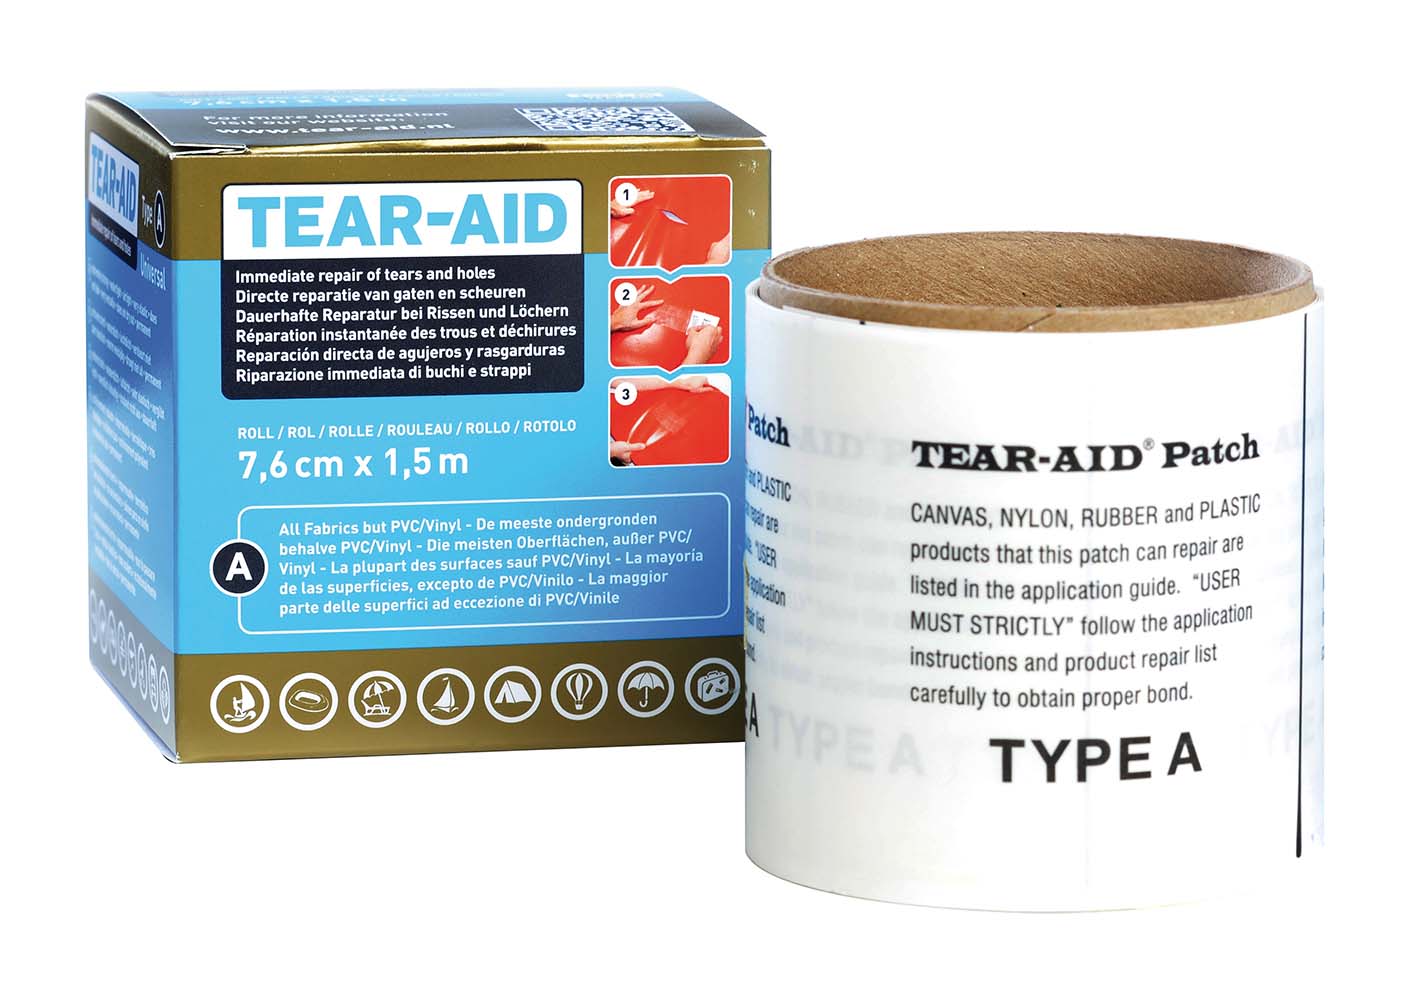 5714002 "A multi-functional and transparent repair agent. Tear-Aid repairs holes and tears permanently in almost all materials. The repair agent is extremely strong, water and airtight, very elastic, it doesn't change colour and it doesn't dry out. Ideal for permanent repair of (party) tent surfaces, polyester (ground) sails, sleeping bags, canvas inflatable beds, self inflating mats, bicycle tires, boats, canoes, sunscreens and umbrellas, jerry cans, diving suits, swimming pools, kites, coats and bags. It is also suitable for use on aluminium, stainless steel, polyester products and more (except for PVC and Vinyl, Tear-Aid B is suitable for this). The repair set contains a roll of Tear-Aid repair tape (150x7.6 cm)."